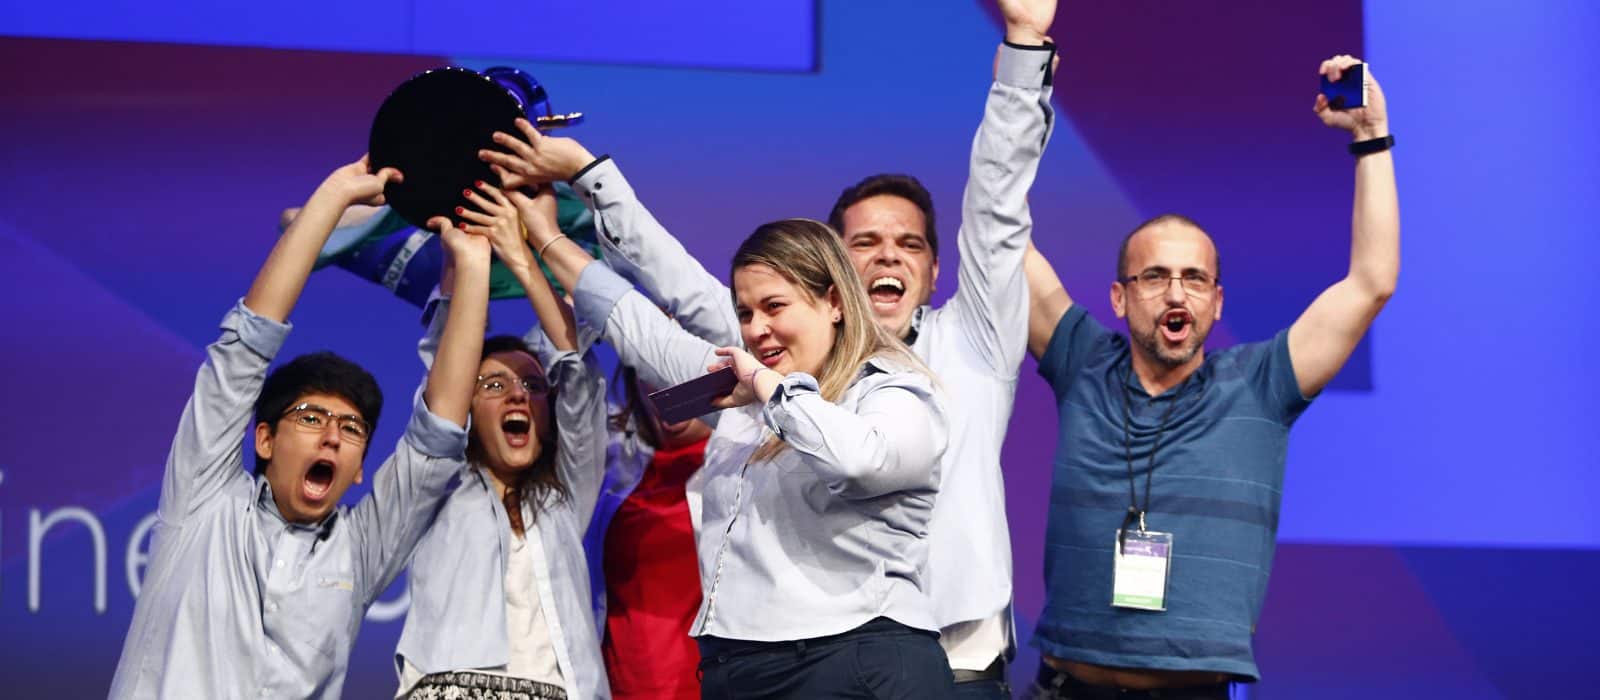 2015 Imagine Cup champions have leveraged contest momentum for real-world success - OnMSFT.com - July 21, 2016